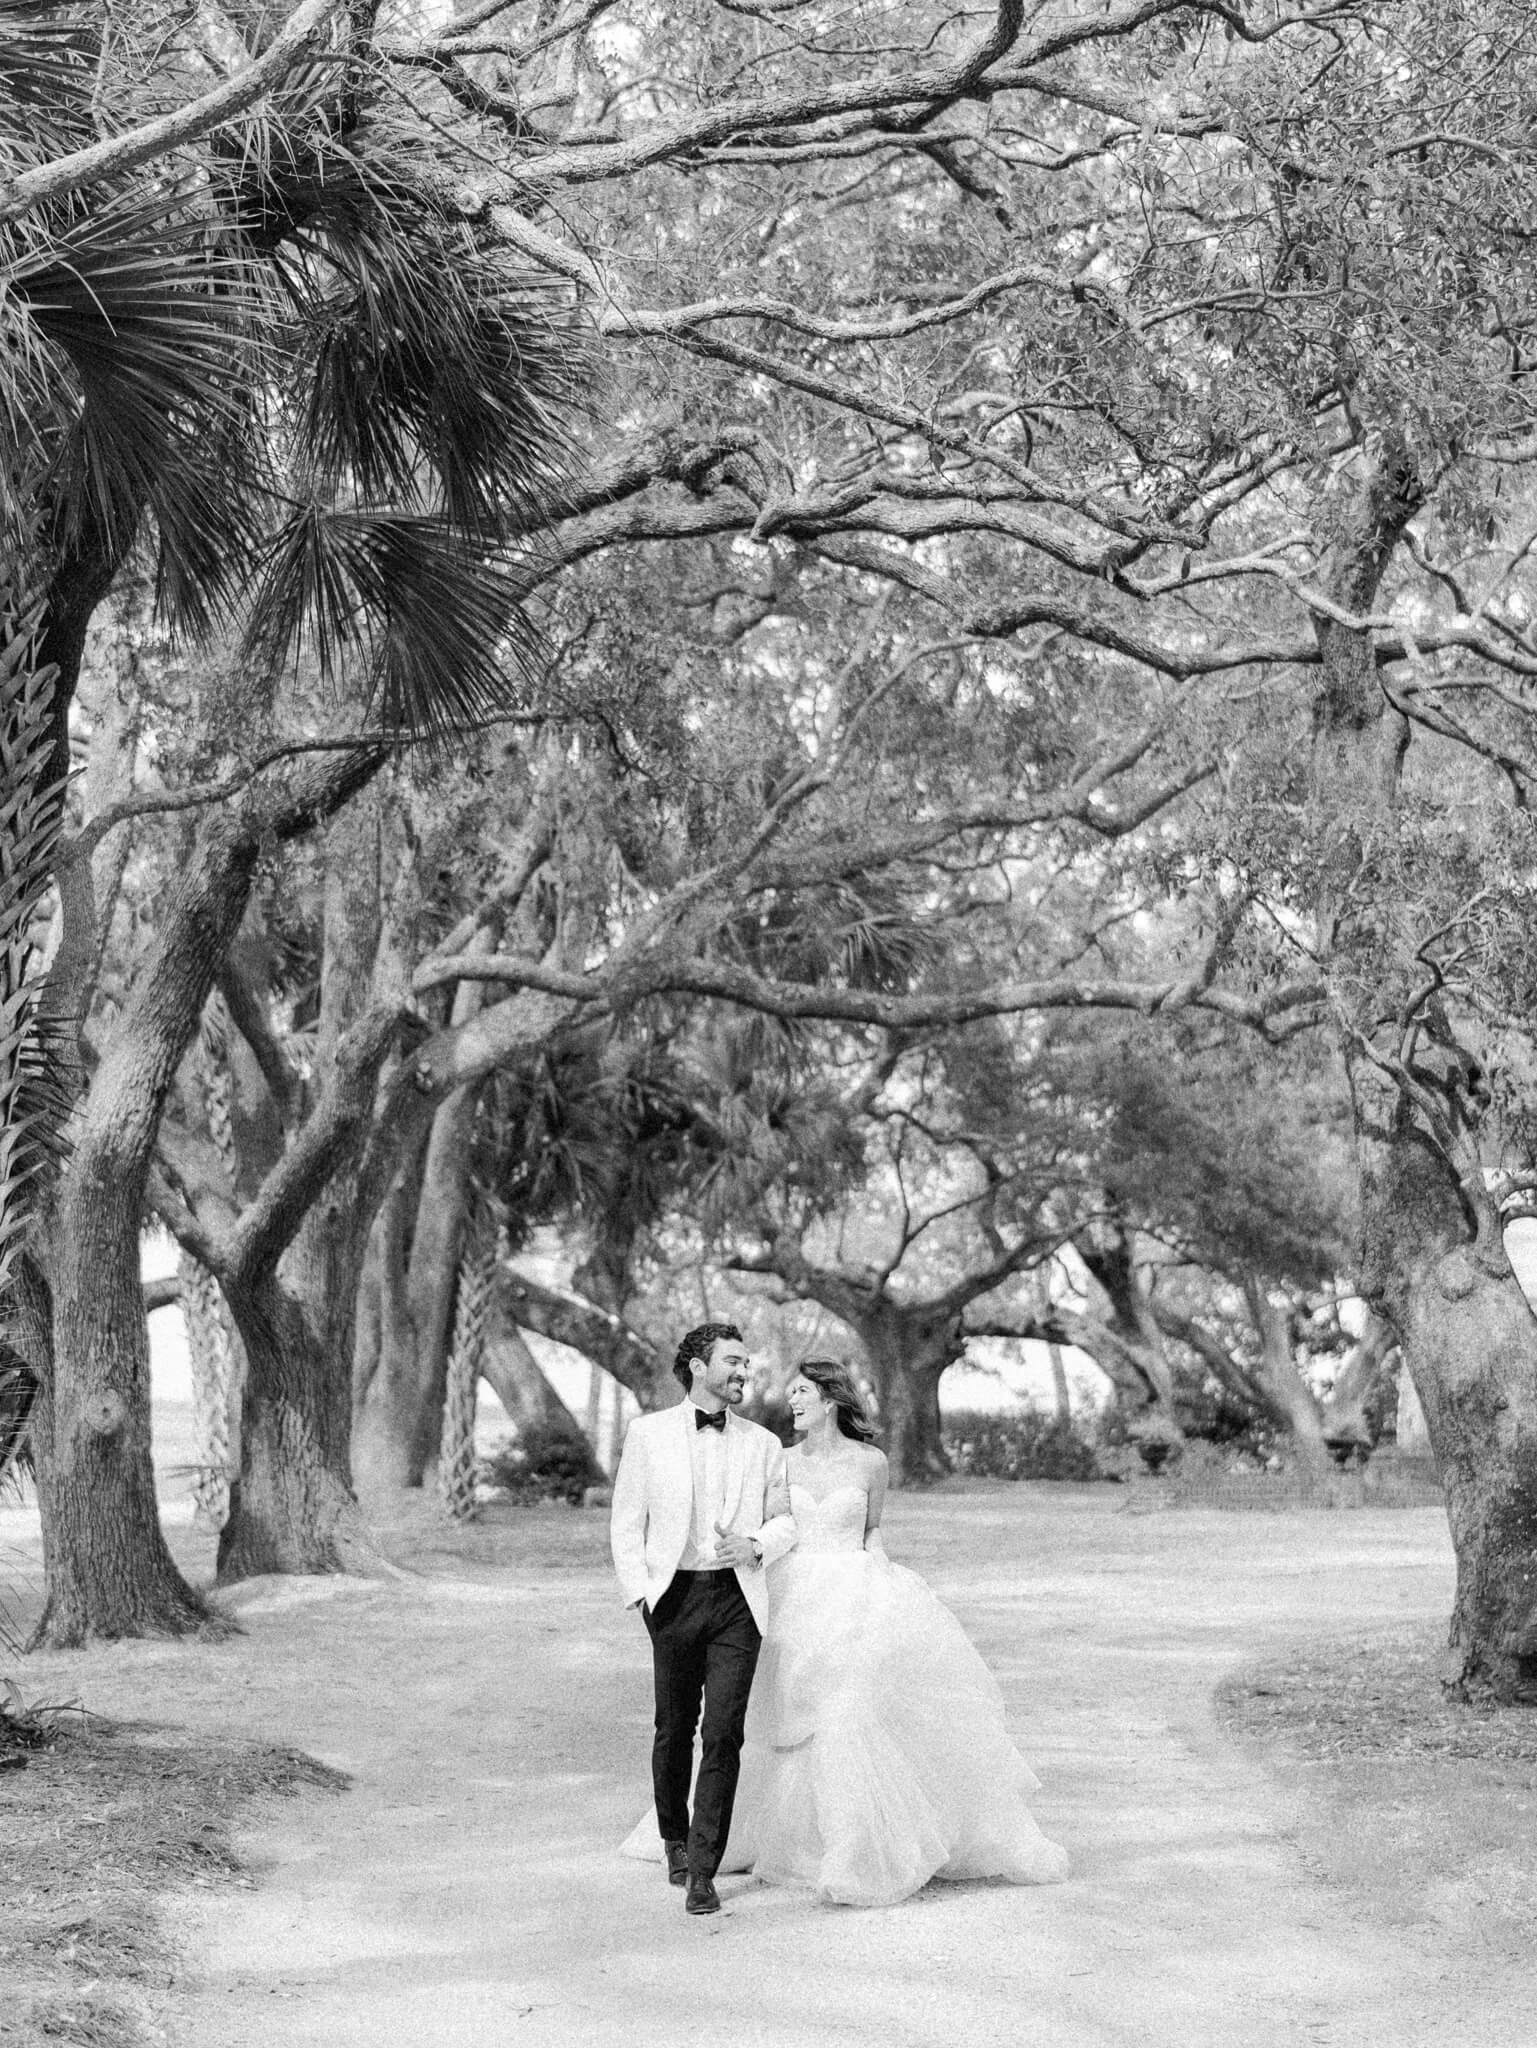 Black and white image of a bride and groom walking with linked arms and looking at each other under a canopy of large live oak trees at Lowndes Grove Wedding Venue.